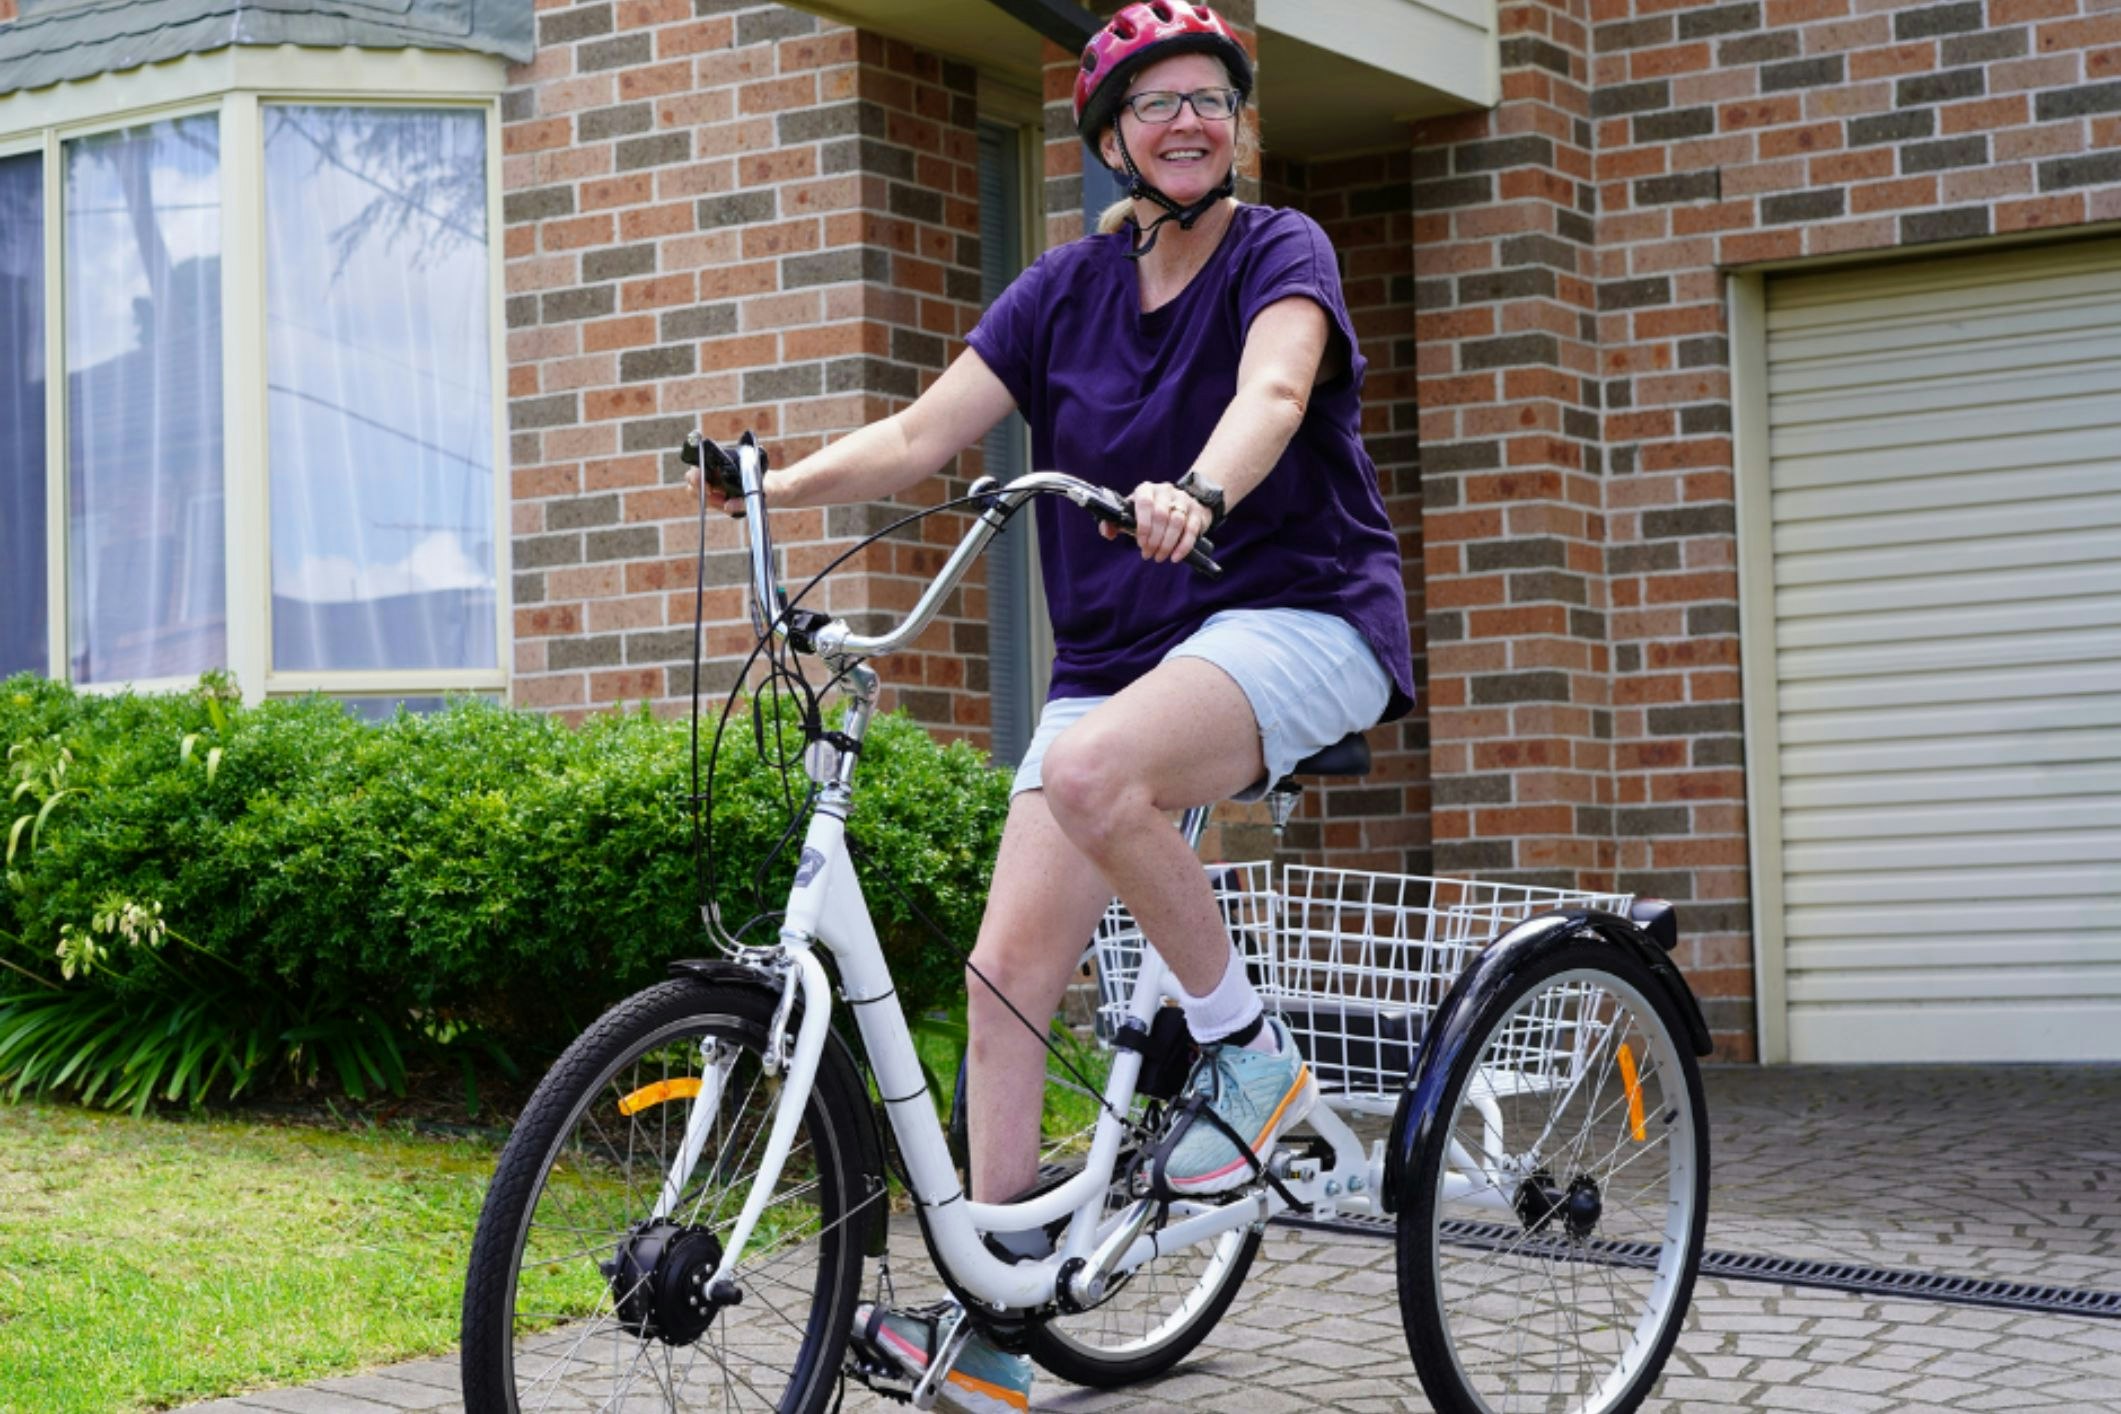 Nicole [pictured], a Solve-TAD/Freedom Solutions Australia client, is able to get around using the bespoke Freedom Wheels bike, provided by the not-for-profit organisation. [Image courtesy of Freedom Solutions Australia]
